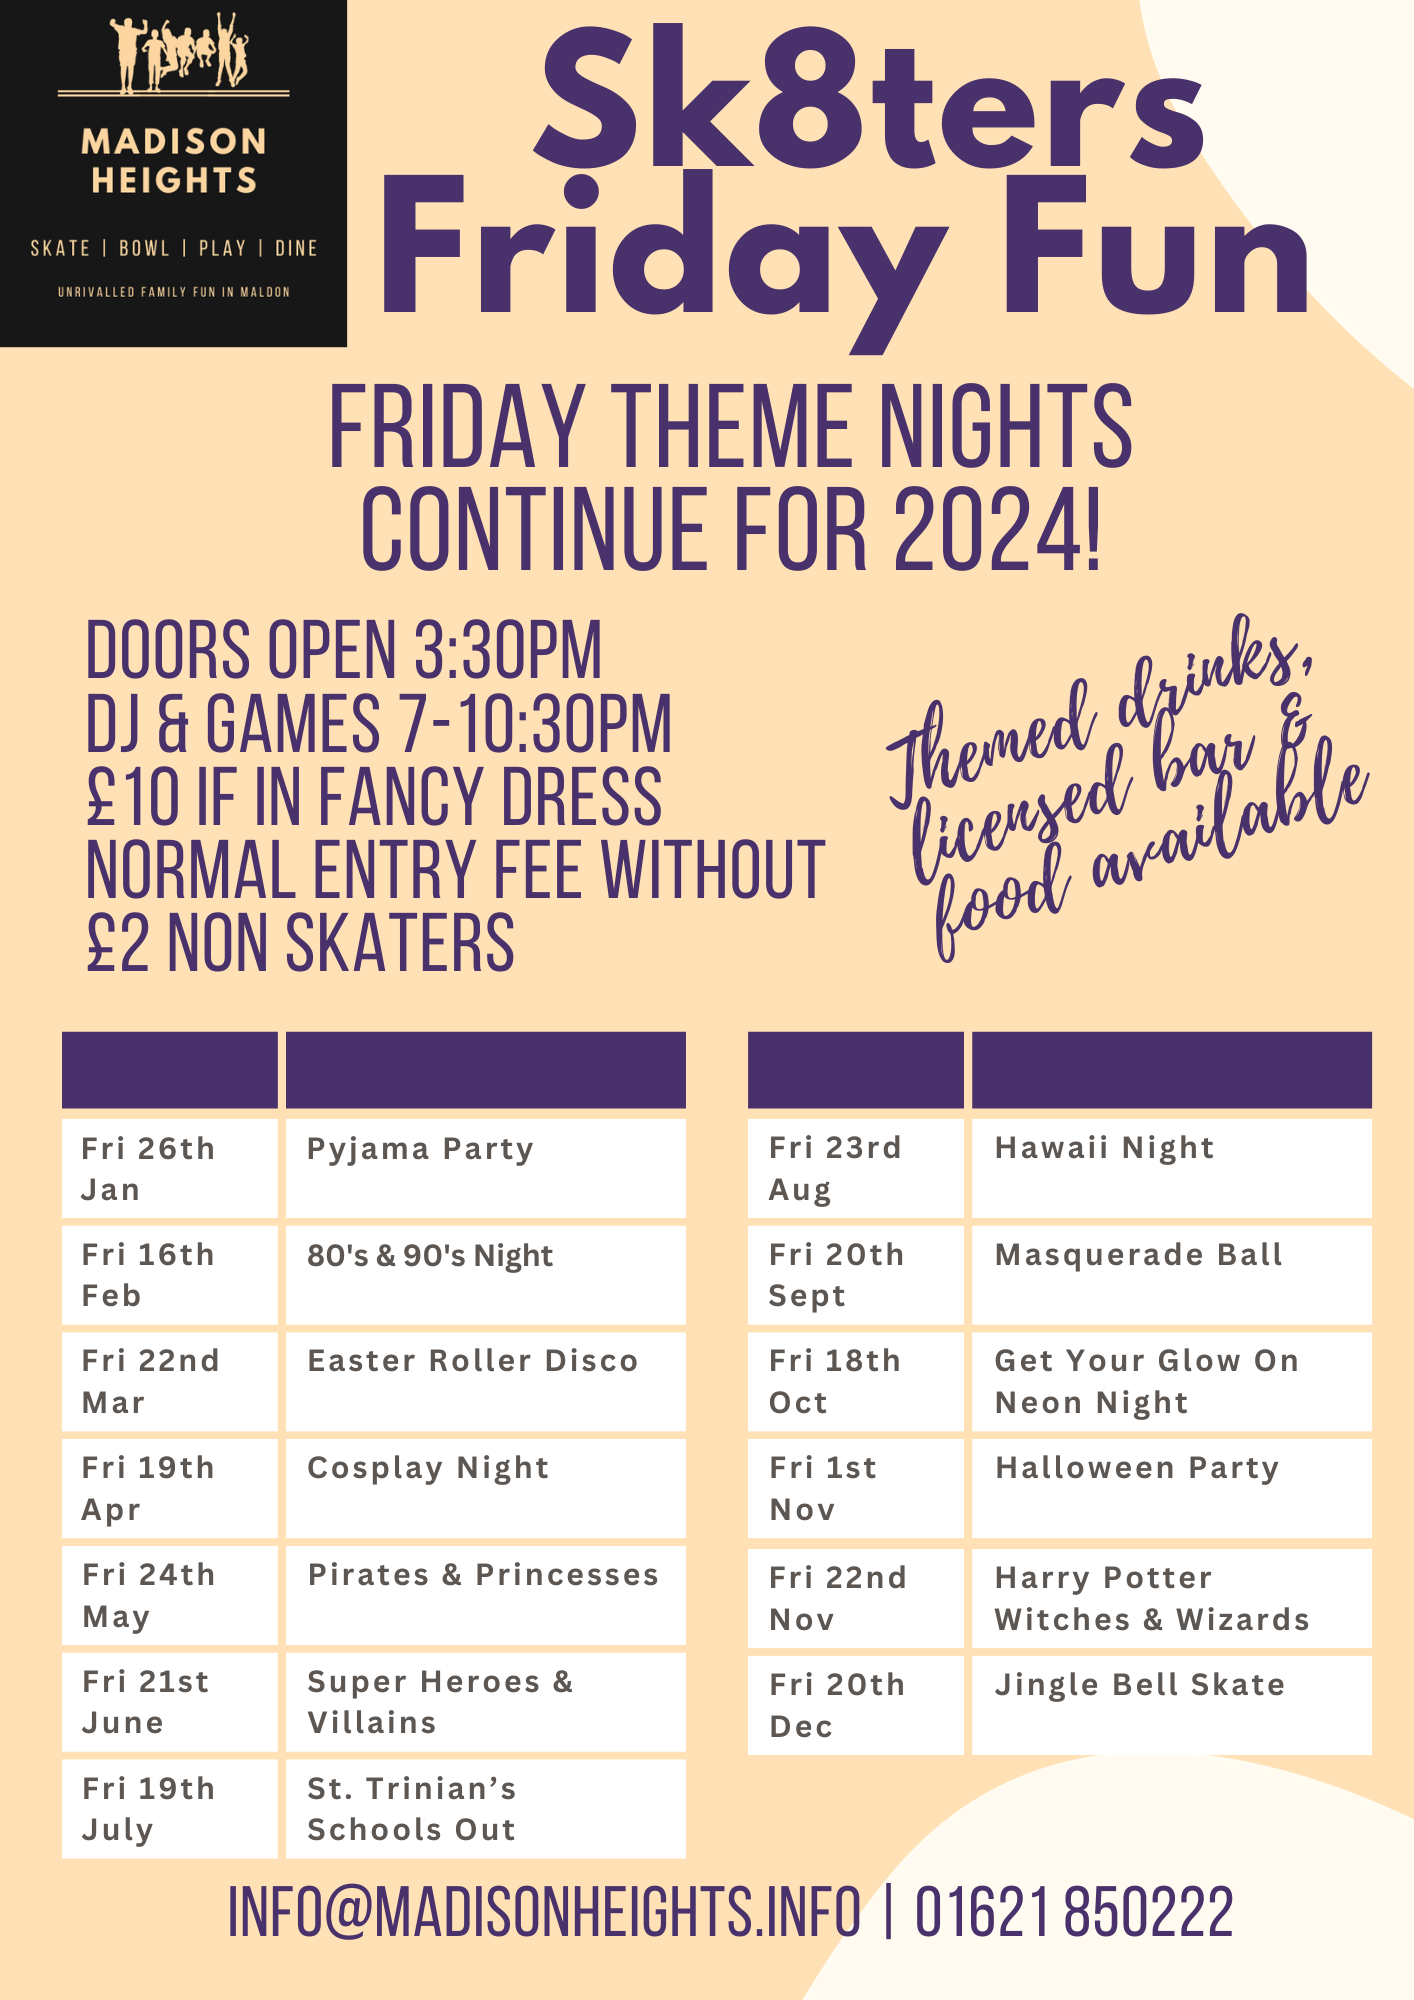 Sk8ter's Event Night themes